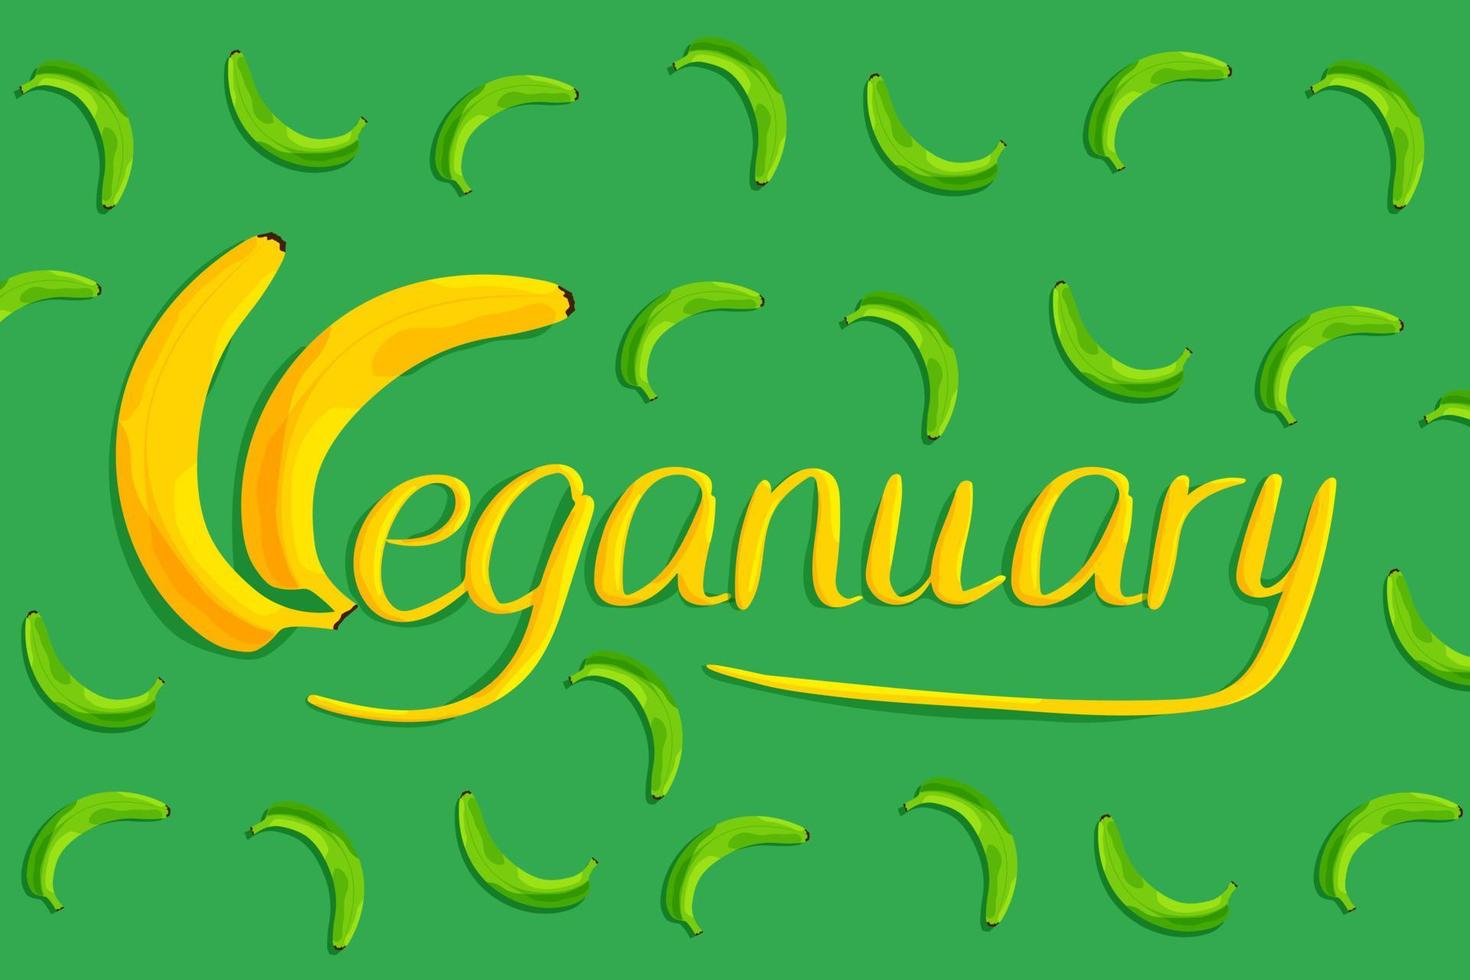 Veganuary hand drawn lettering on a green background made of bananas. Vector illustration in flat style